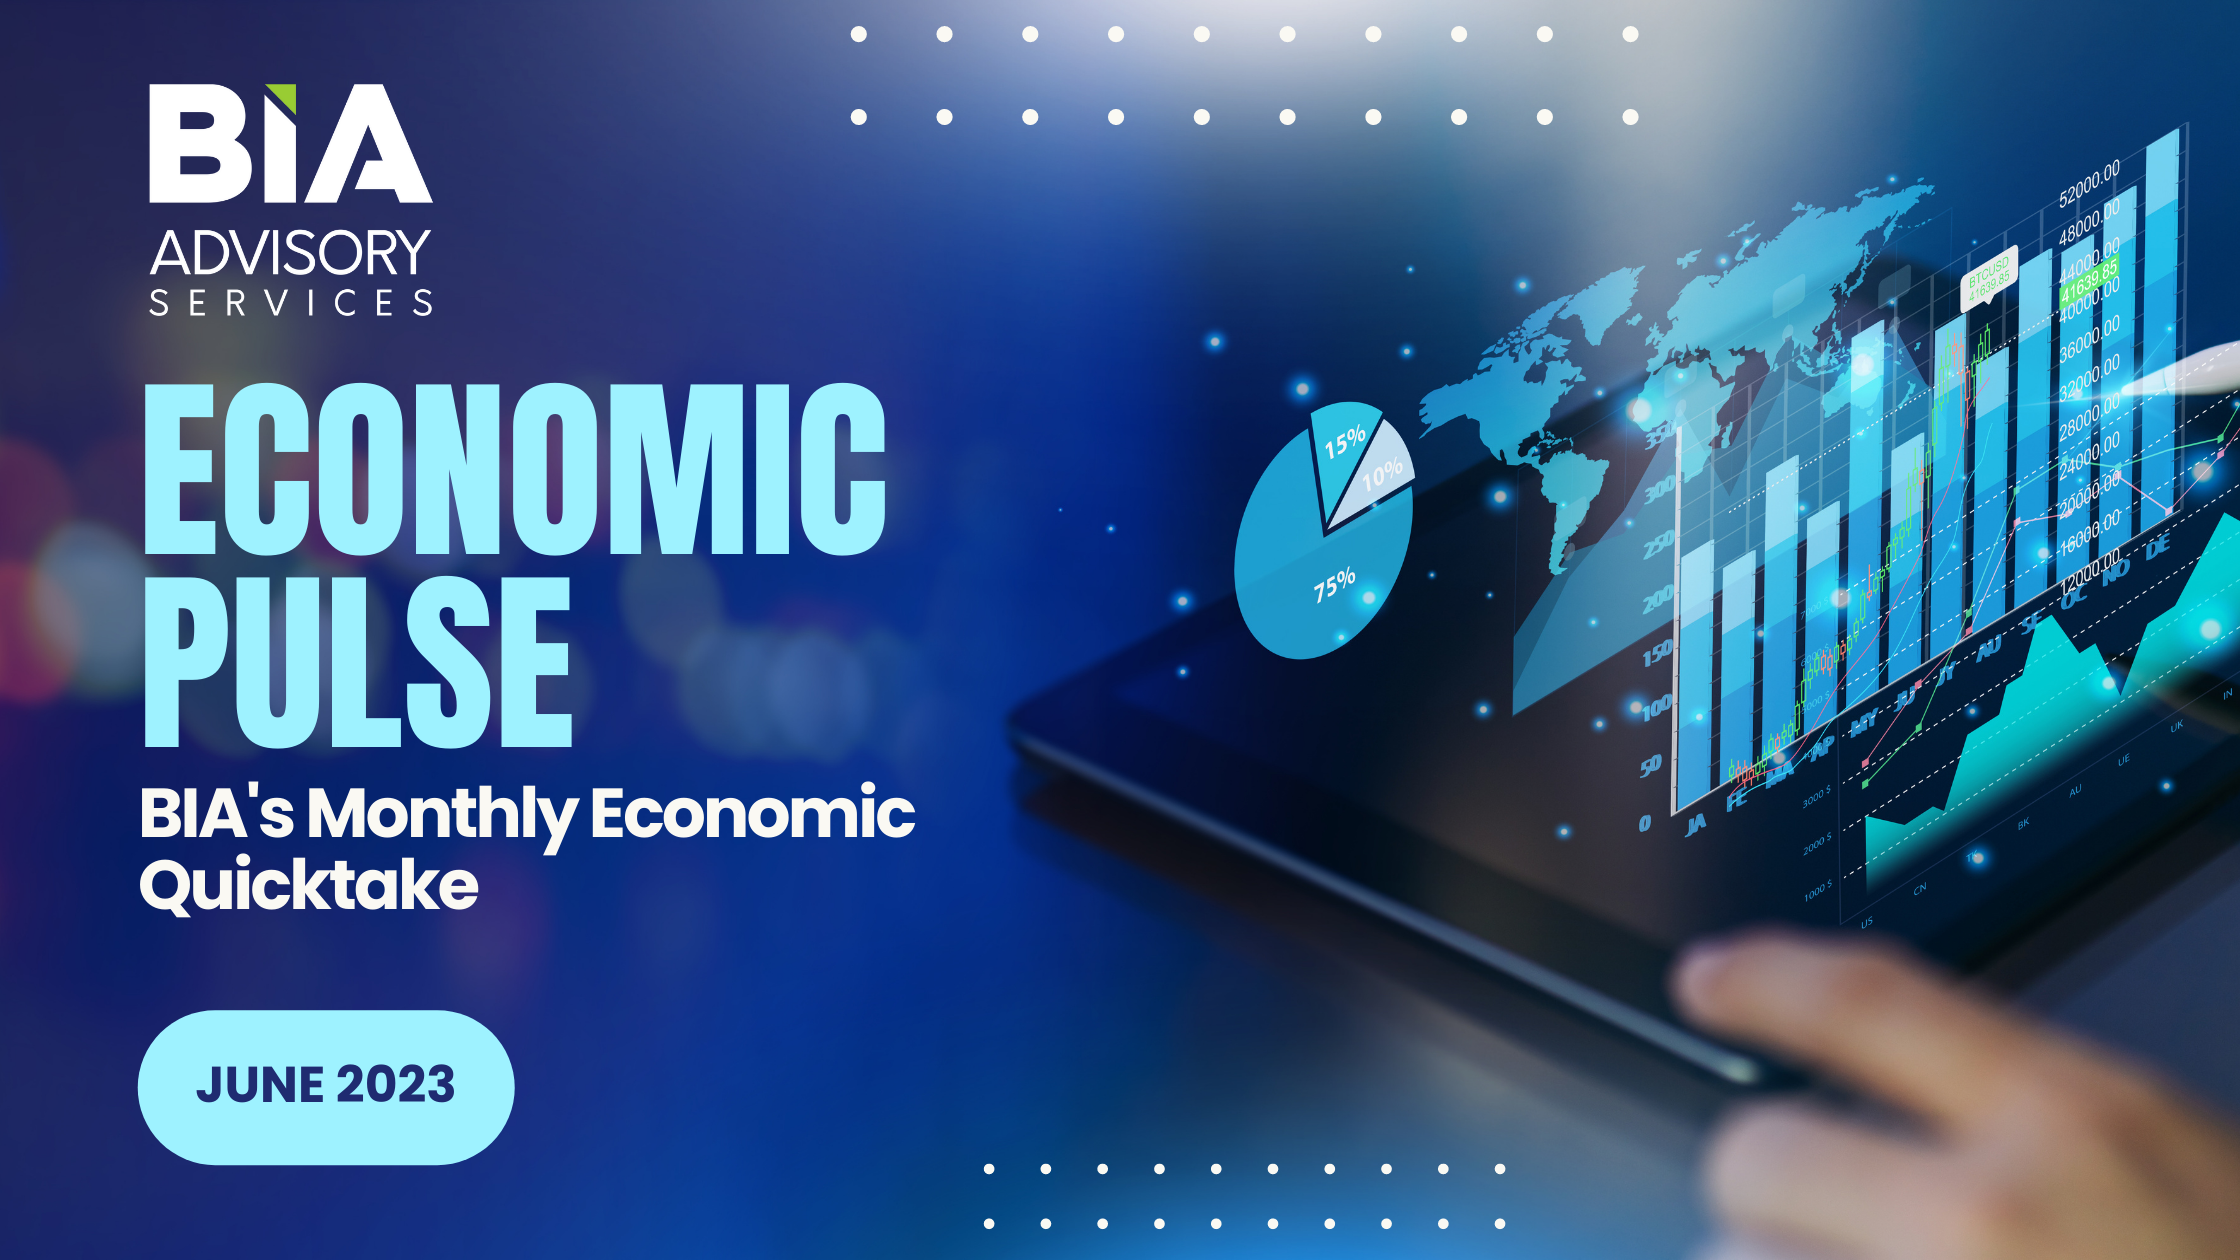 Economic Pulse: BIA’s Monthly Quick Take For June 2023